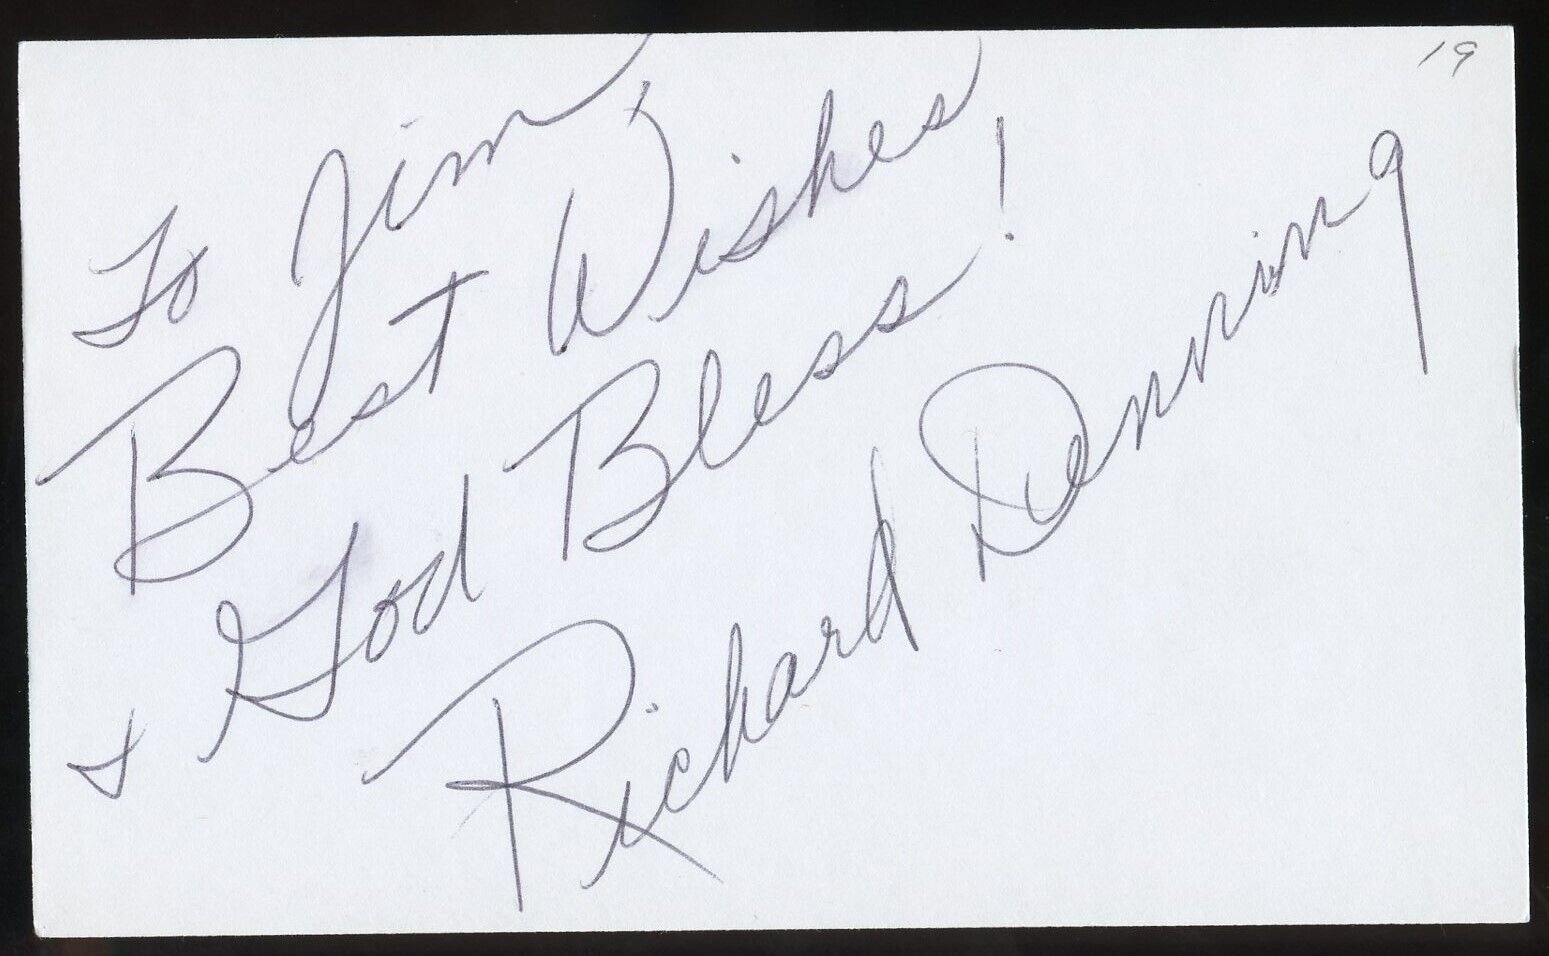 Richard Denning d1998 signed autograph 3x5 Cut American Actor in Unknown Island